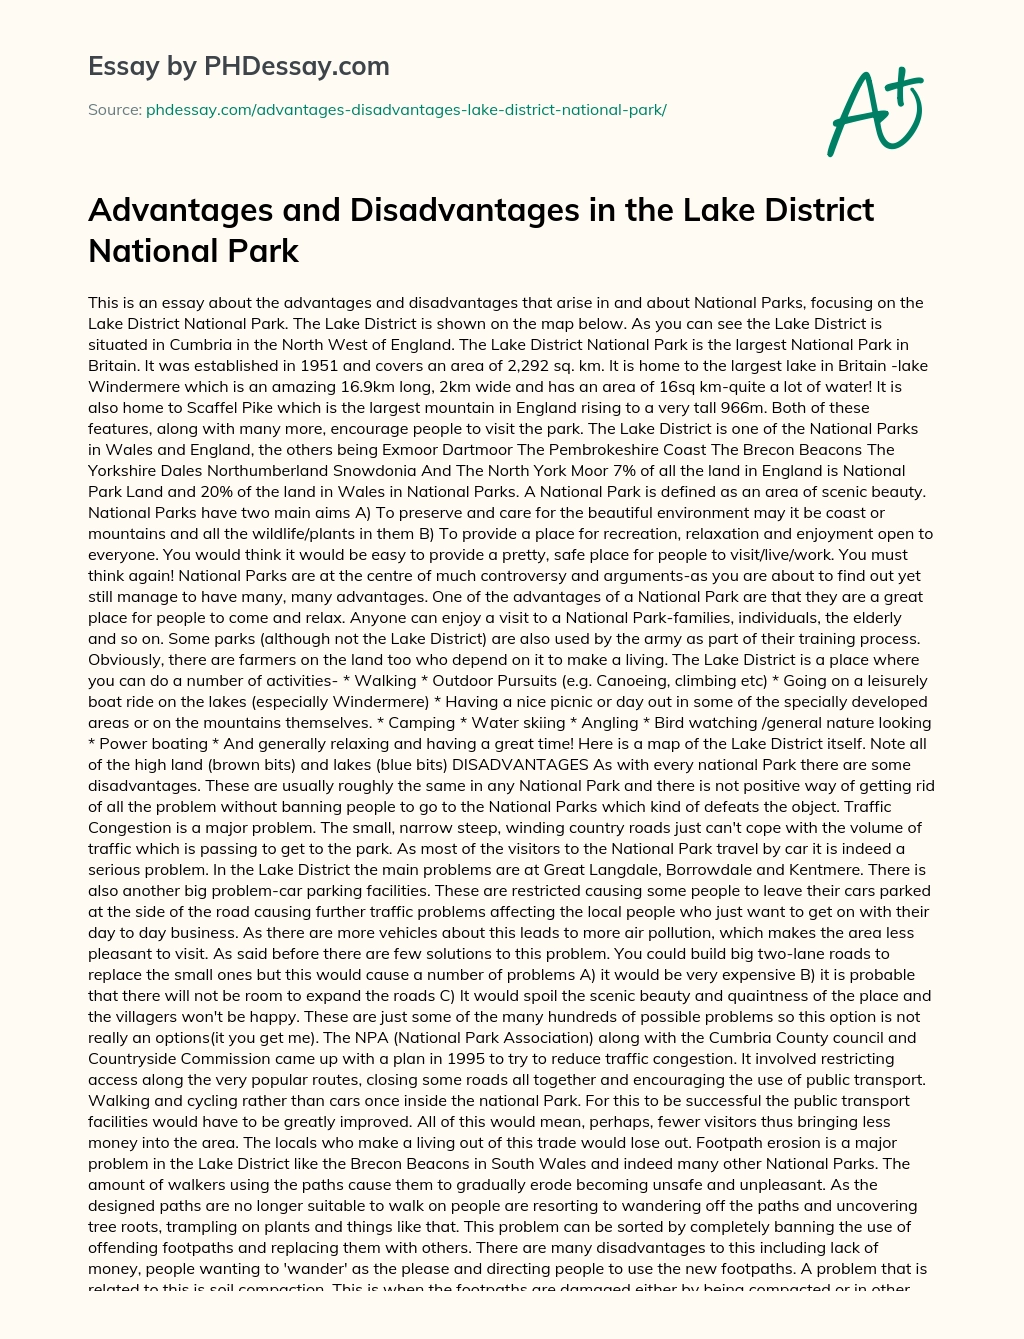 Advantages and Disadvantages in the Lake District National Park essay